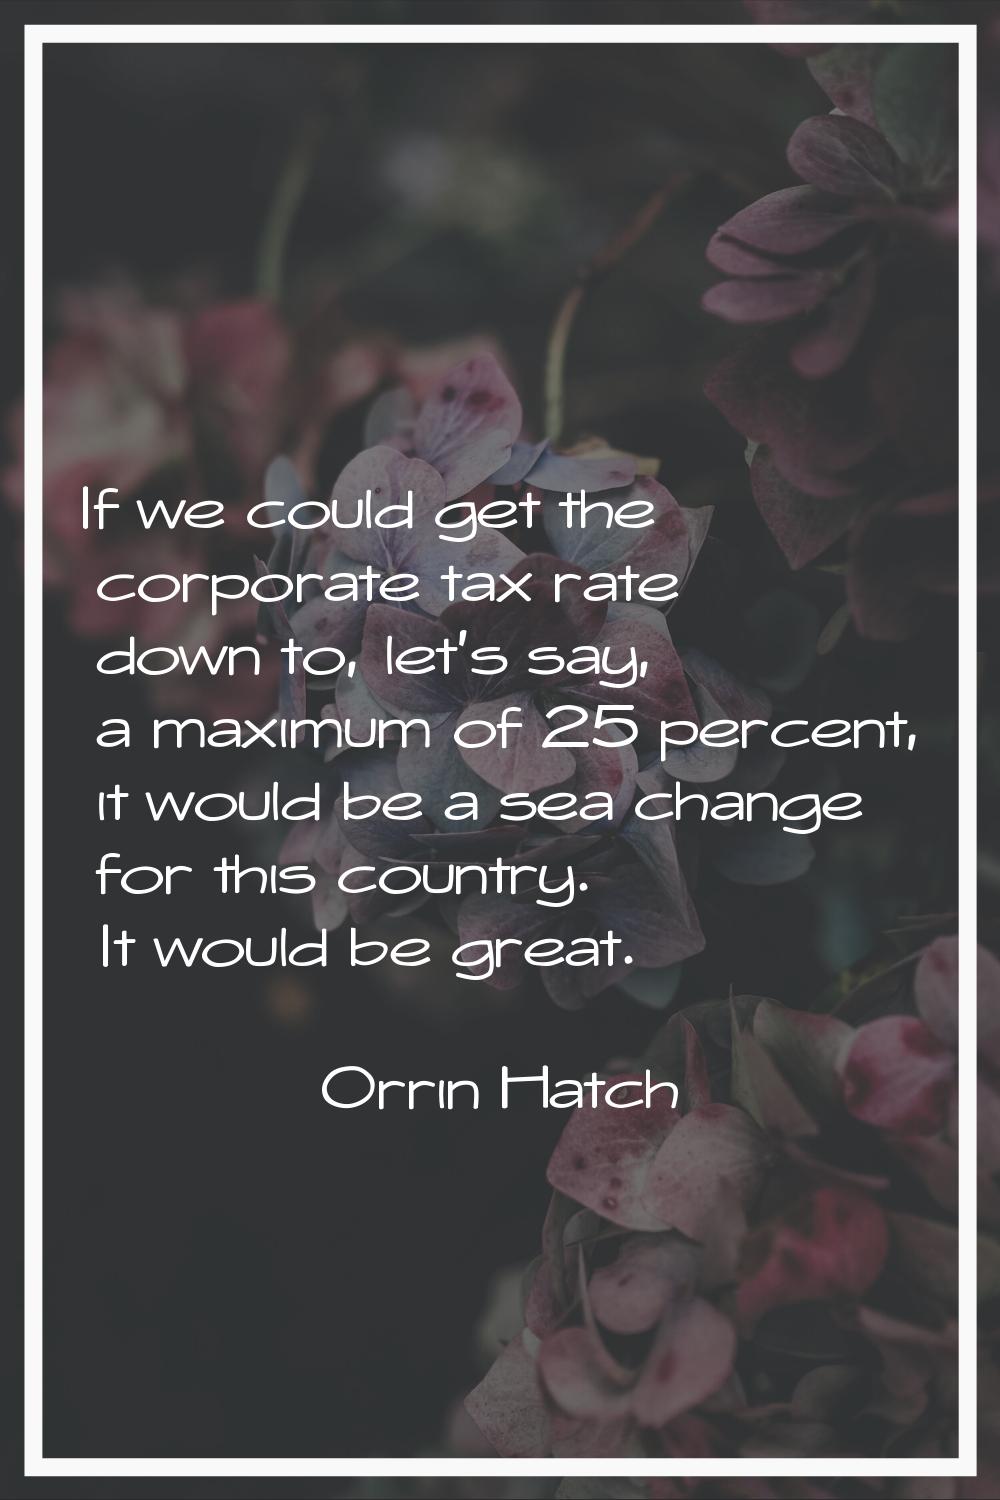 If we could get the corporate tax rate down to, let's say, a maximum of 25 percent, it would be a s